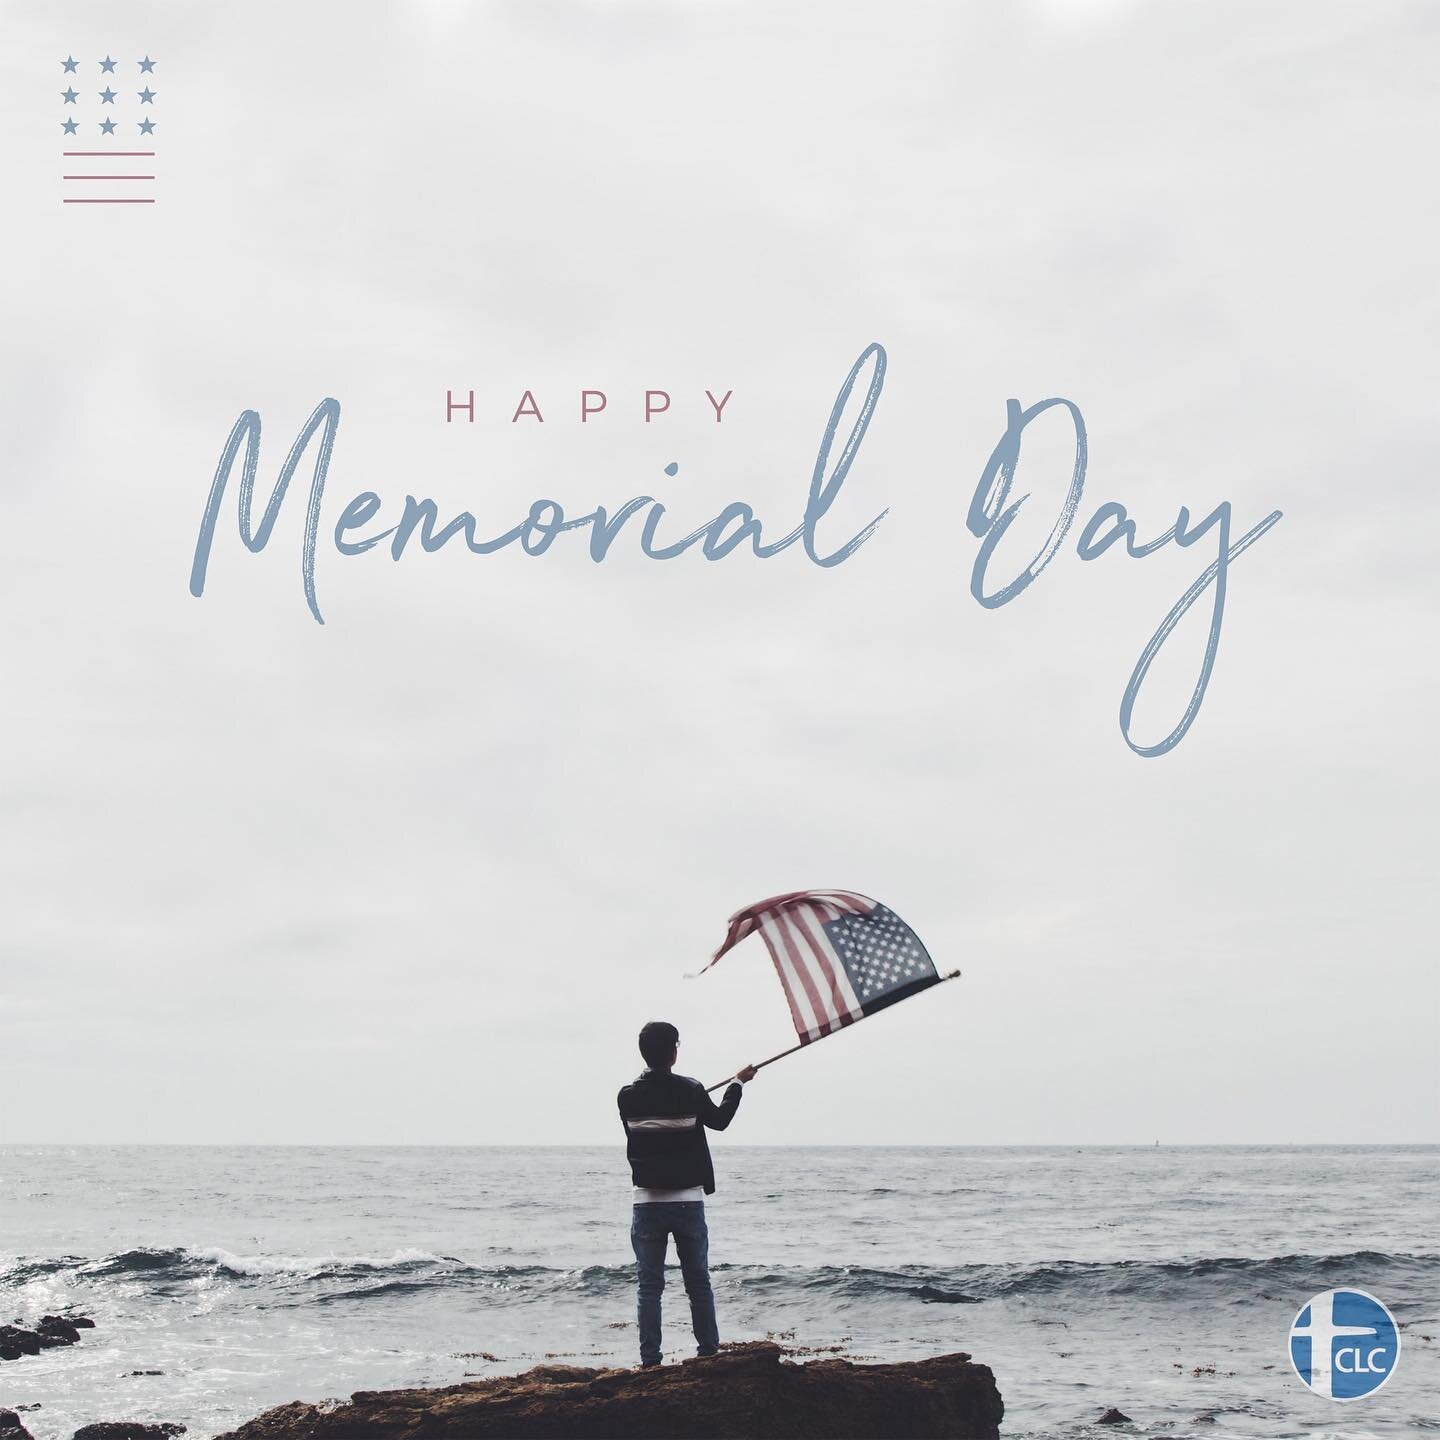 &ldquo;Greater love hath no man than this, that a man lay down his life for his friends.&rdquo; - John‬ ‭15:13‬. Today, we honor the men and women who have given the ultimate sacrifice so we are free. #MemorialDay #NeverForget